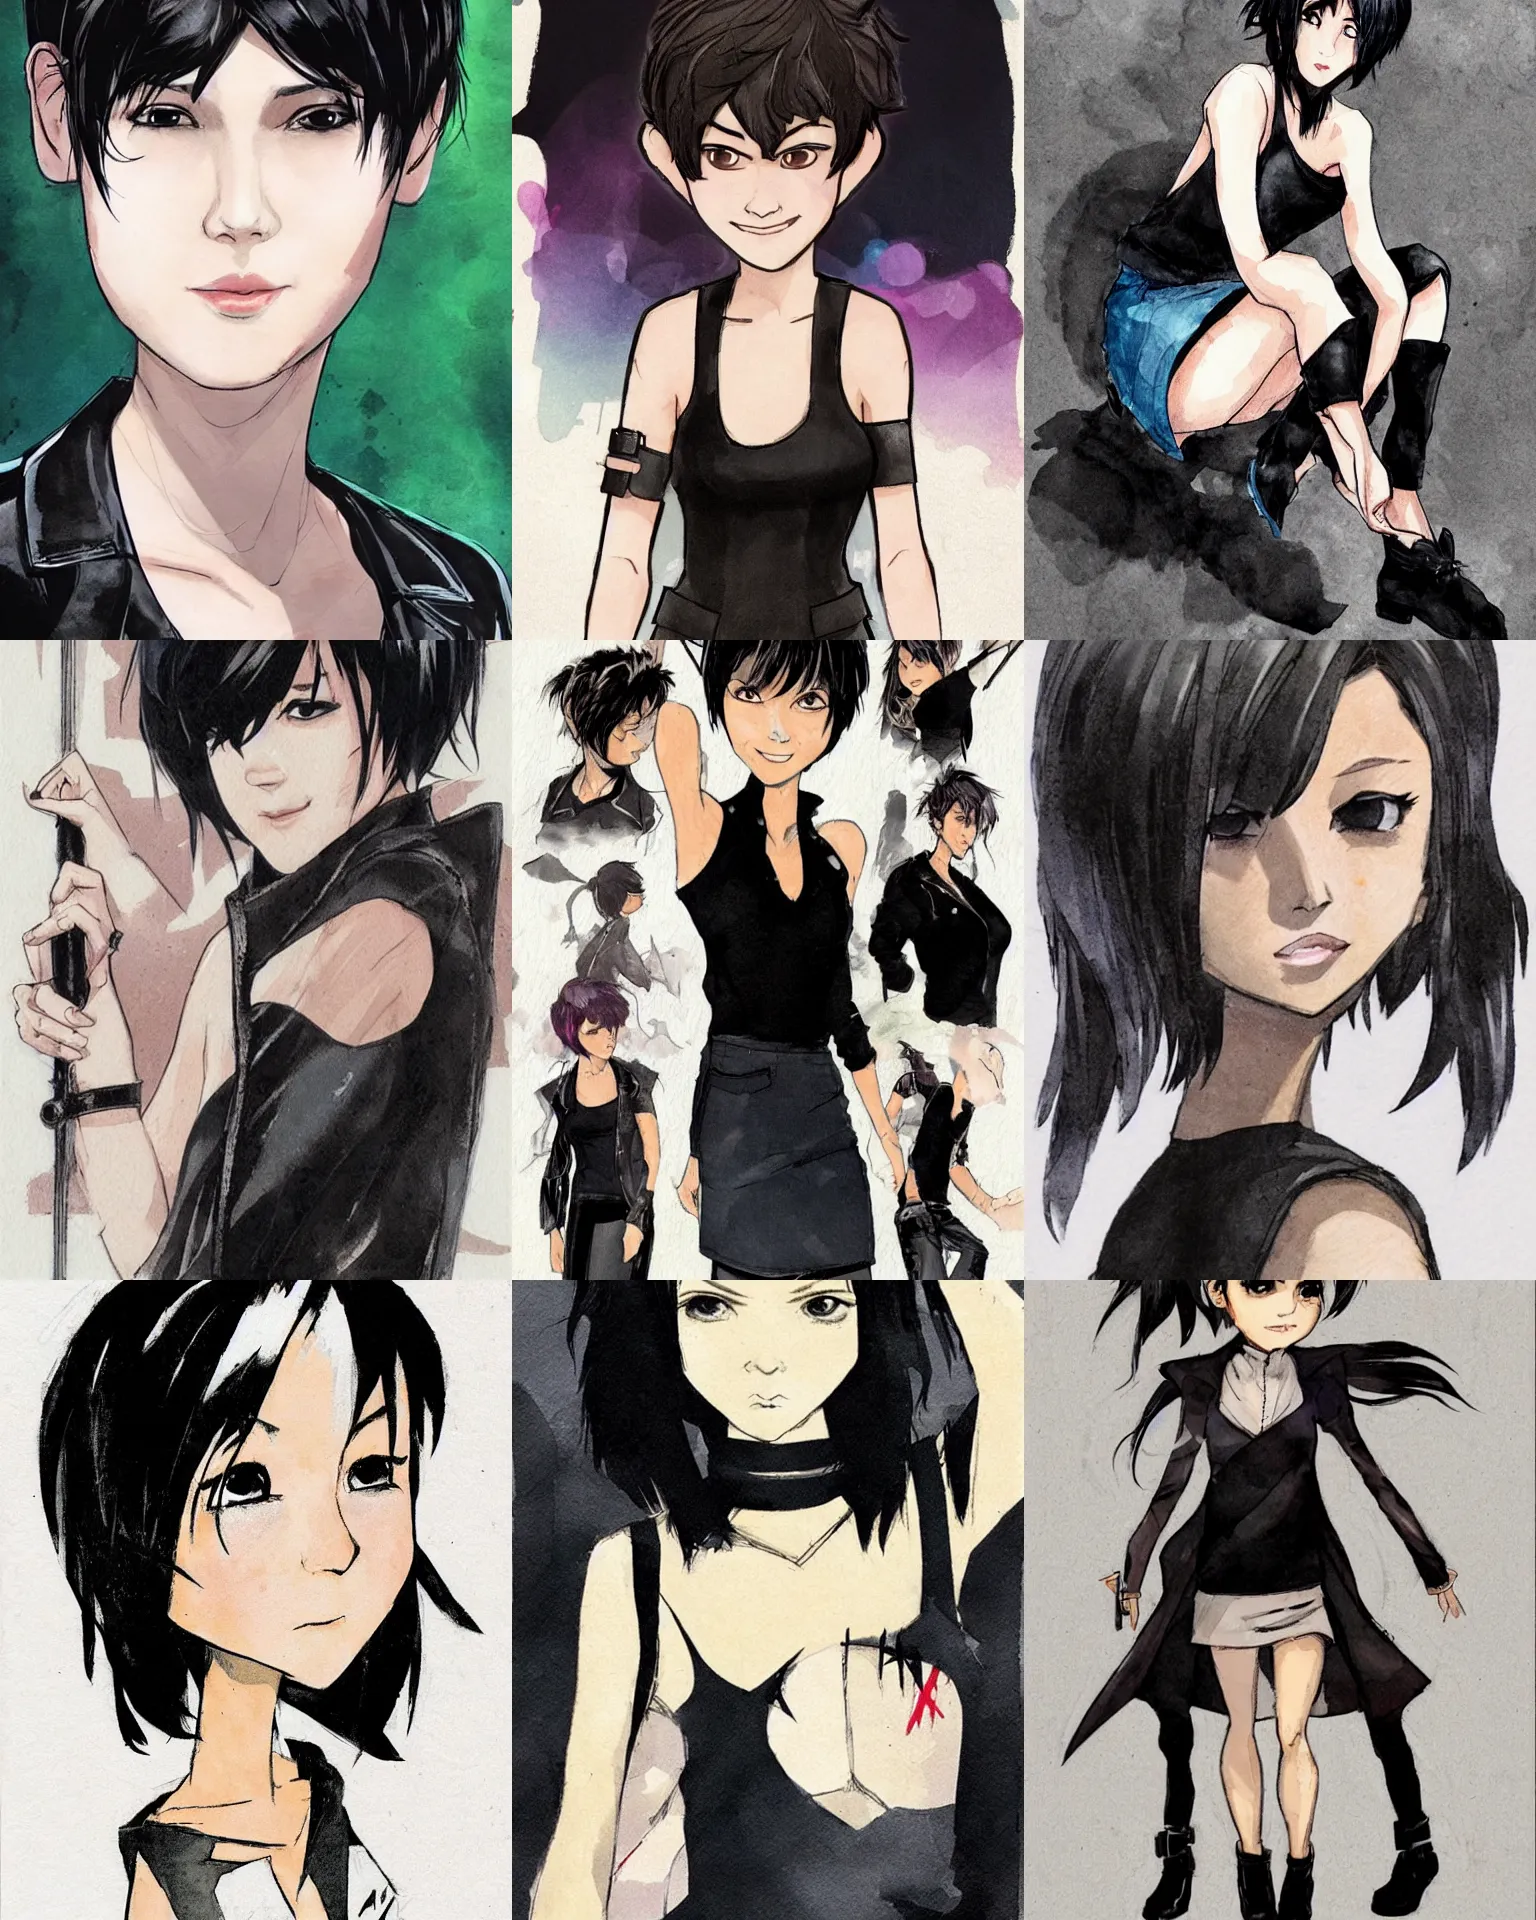 Prompt: character art by Dustin Nguyen. Her hair is dark brown and cut into a short, messy pixie cut. She has a slightly rounded face, with a pointed chin, large entirely-black eyes, and a small nose. She is wearing a black tank top, a black leather jacket, a black knee-length skirt, a black choker, and black leather boots.